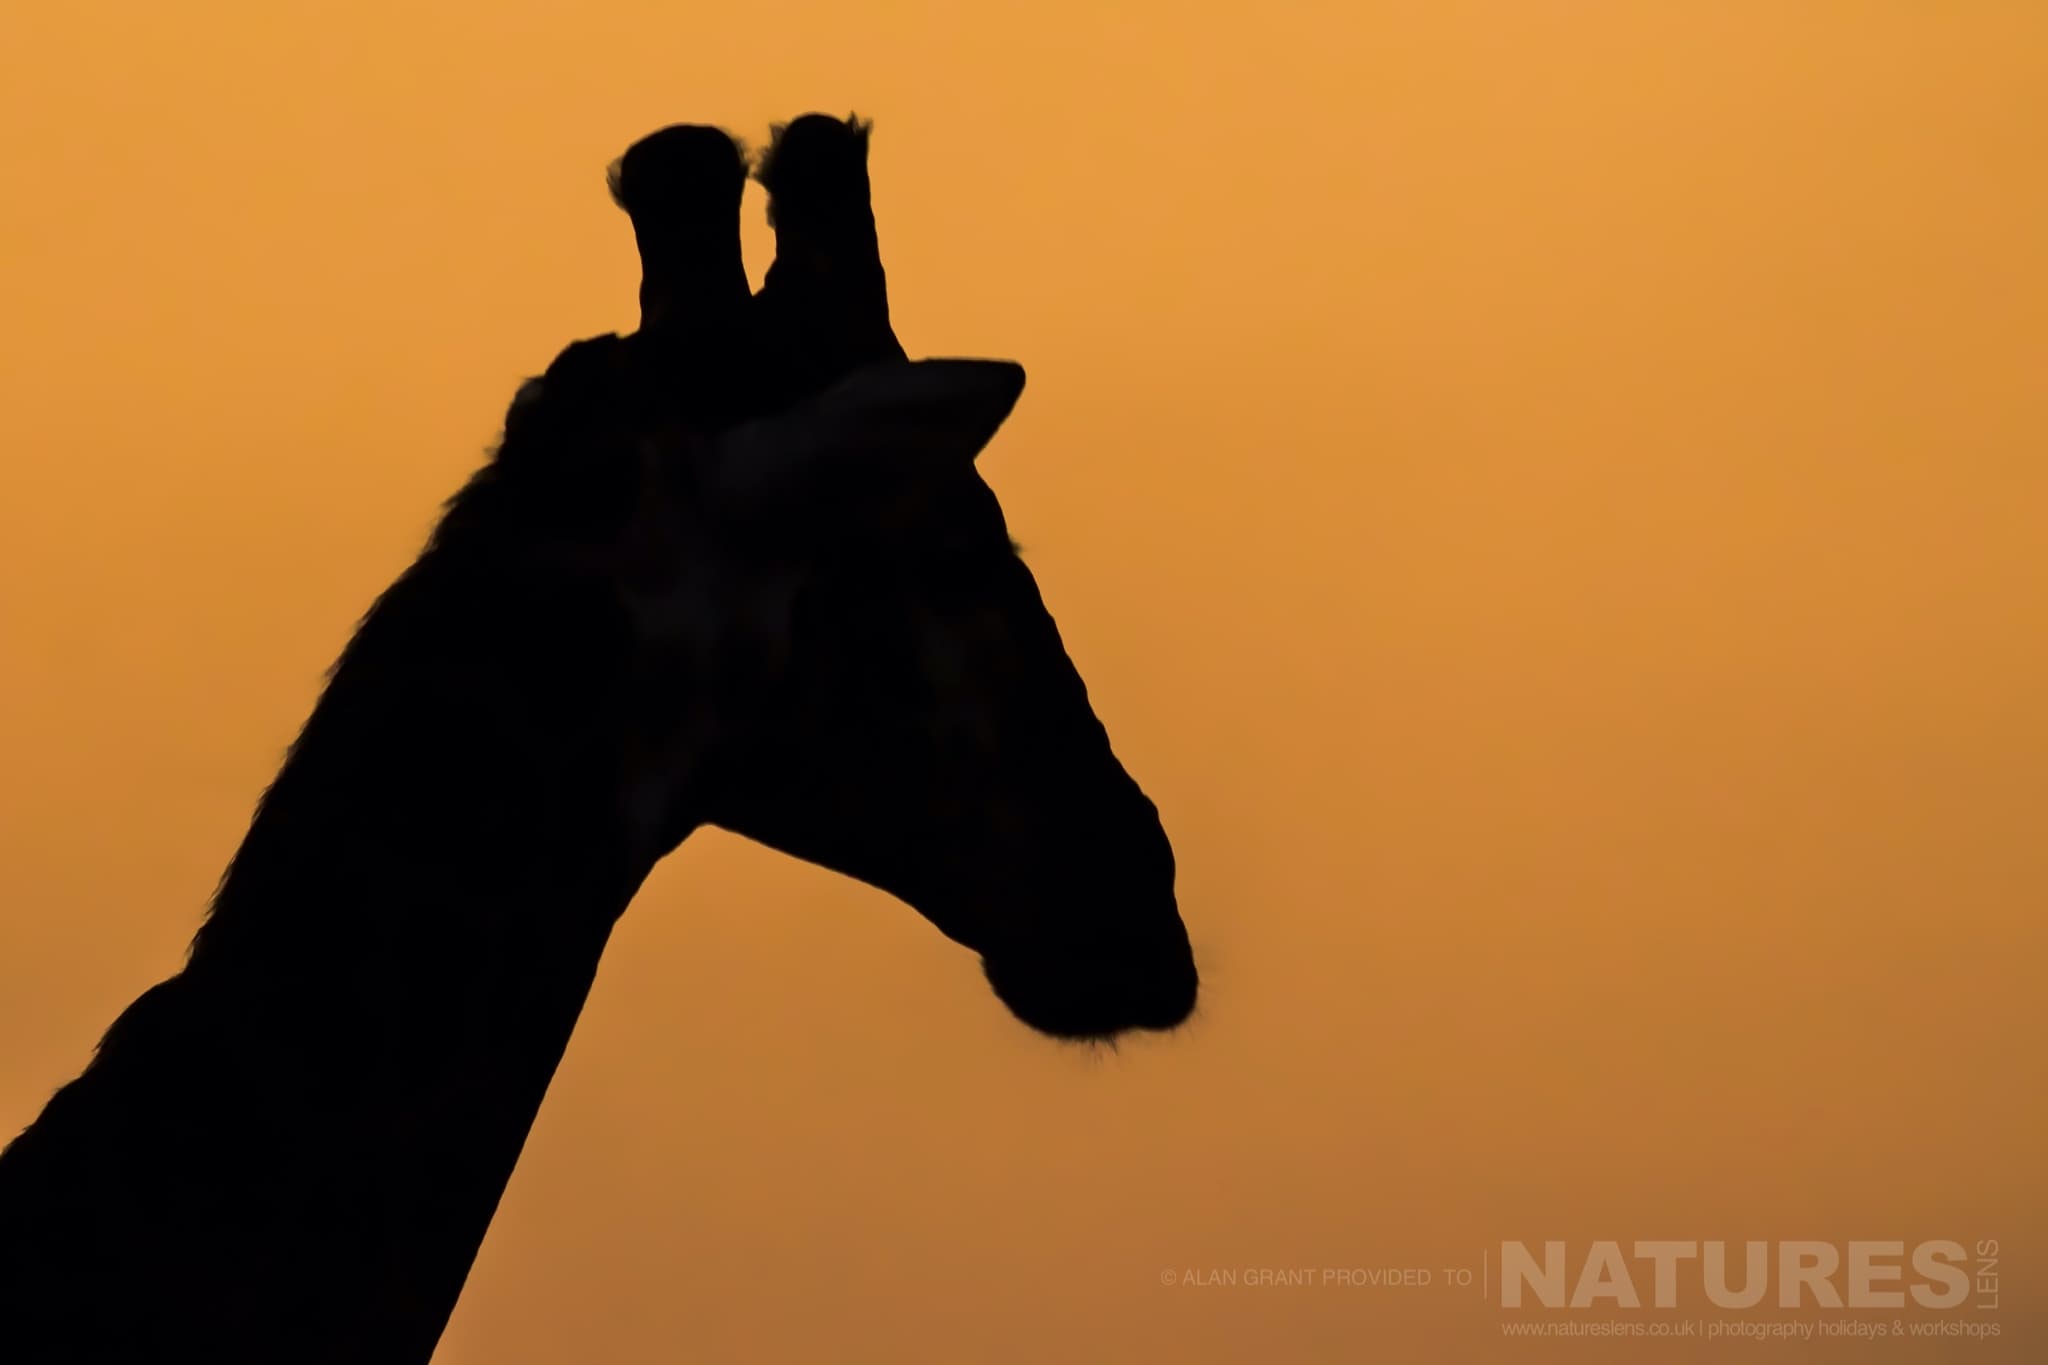 A Giraffe Silhouette At Sunset Taken During The Zimanga Photography Safari Led By Natureslens